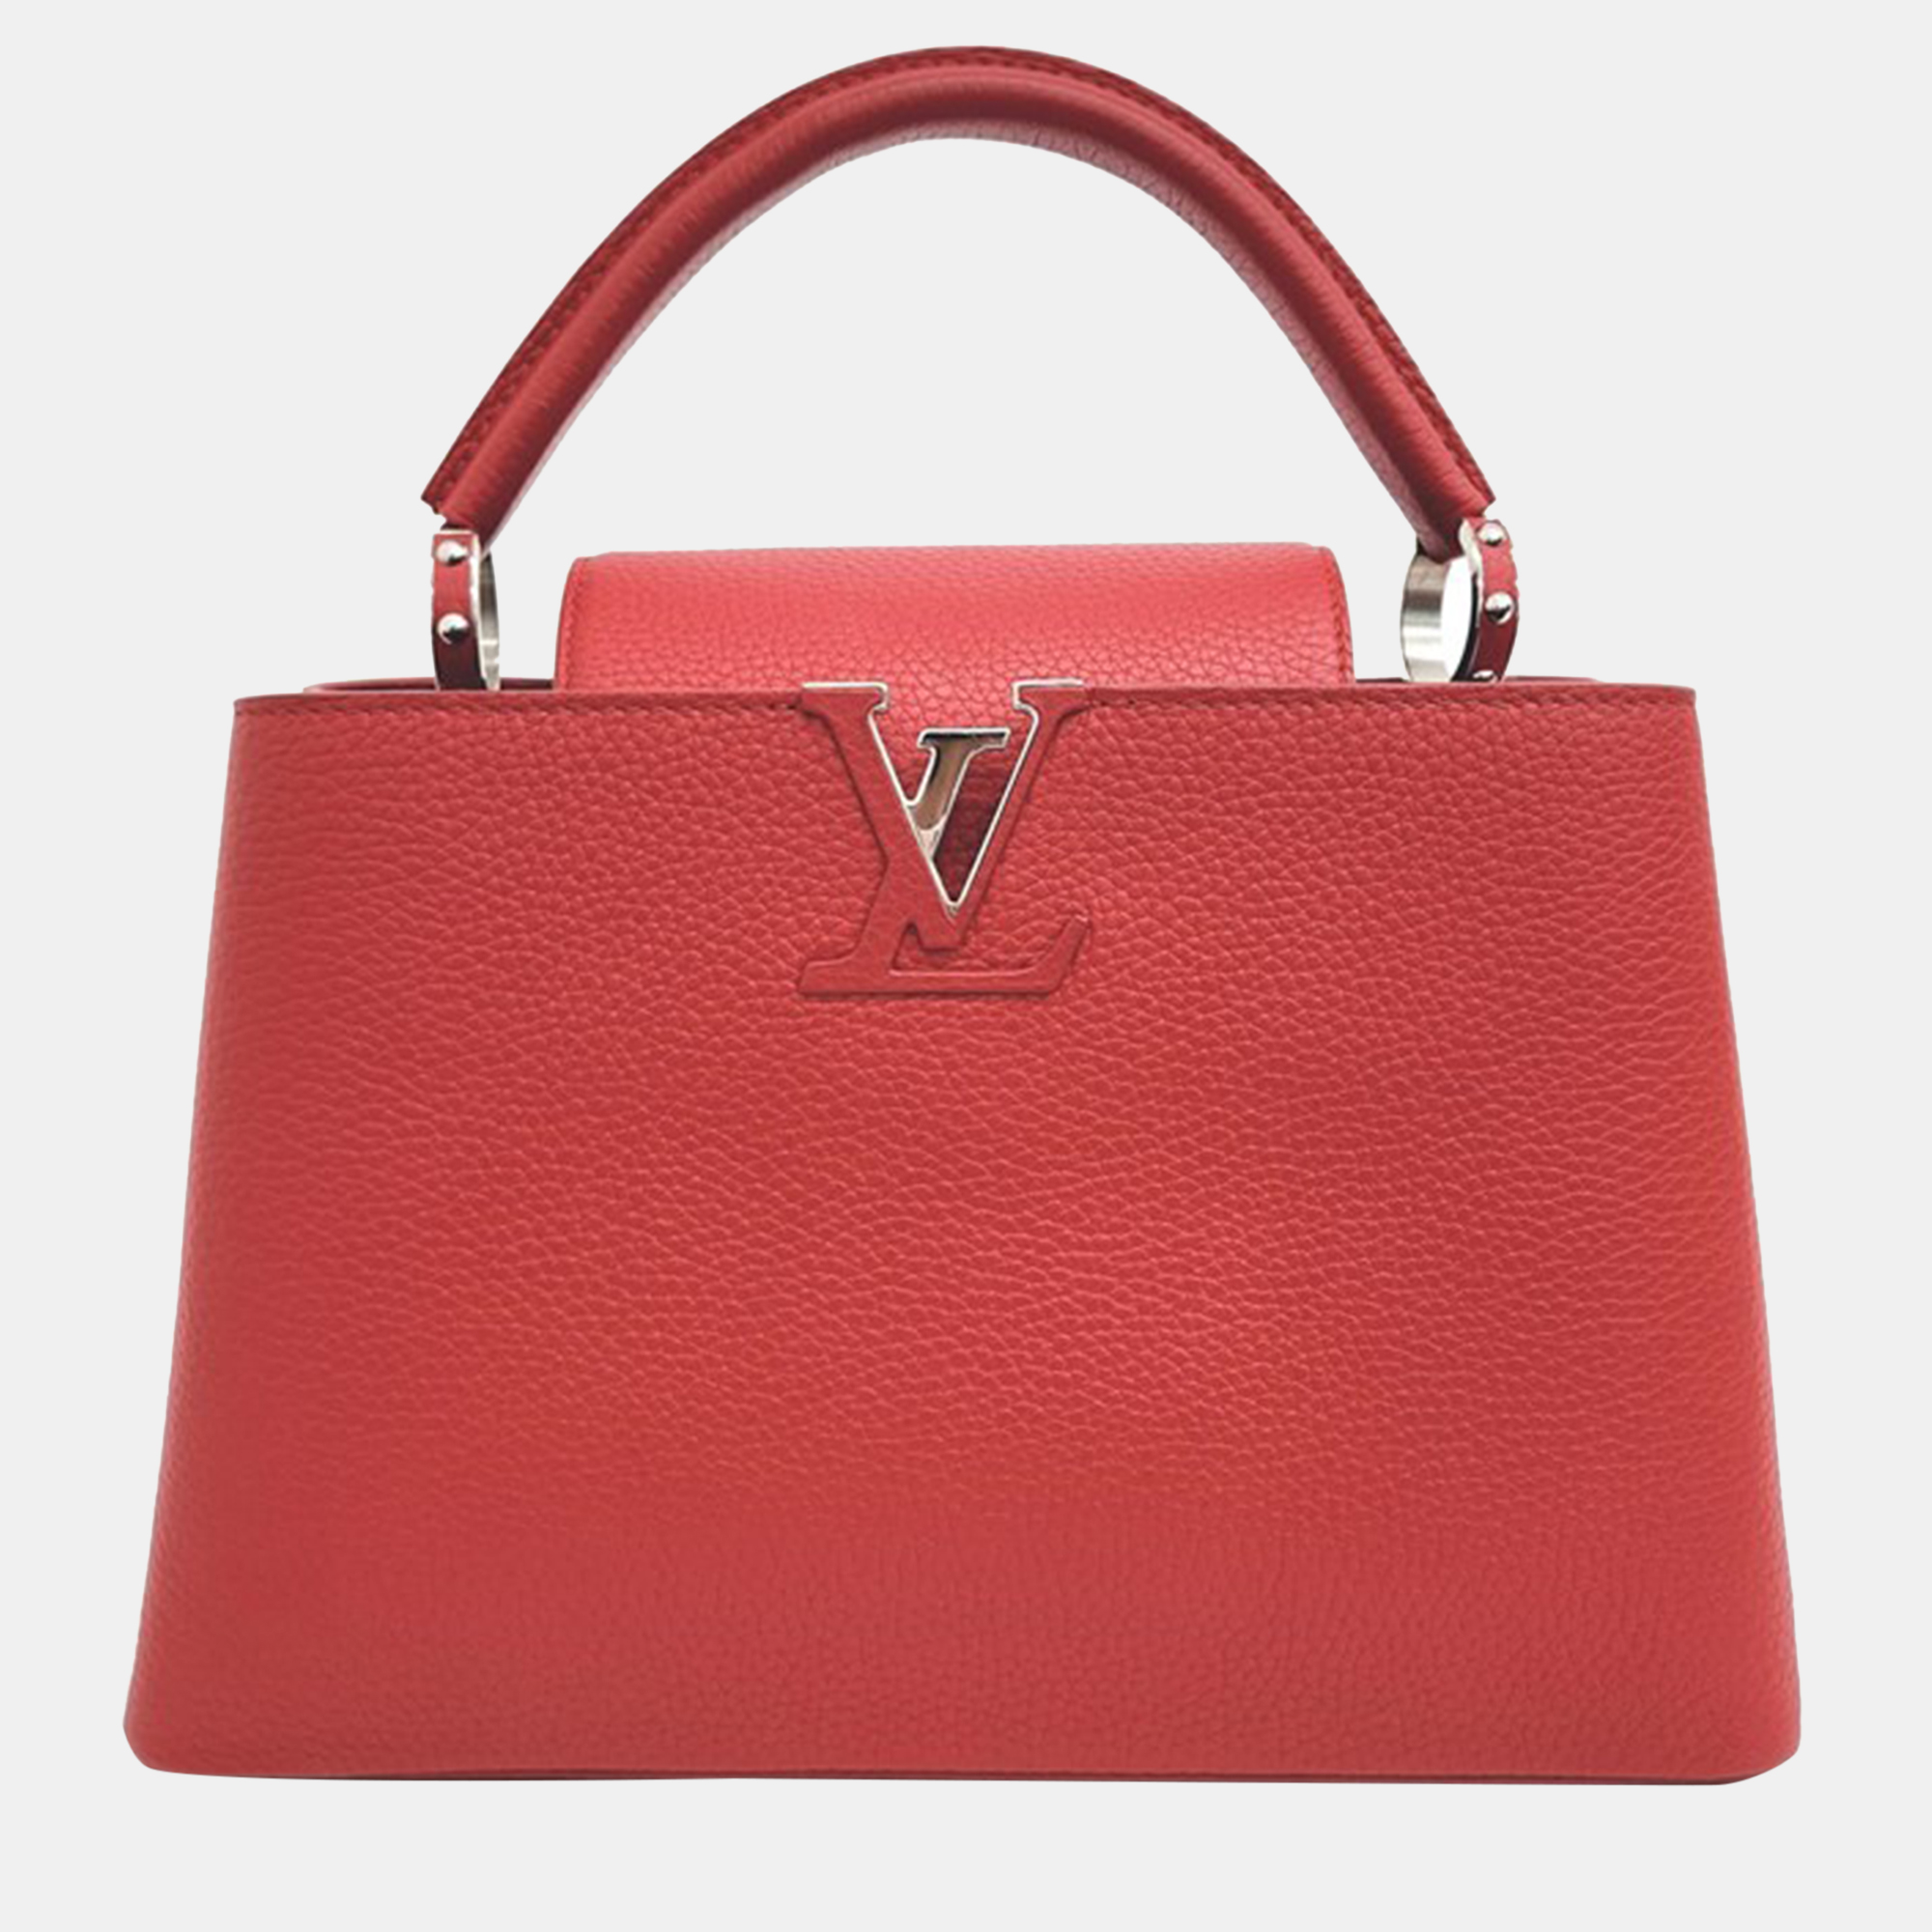 Louis vuitton red leather capucines mm top handle bag